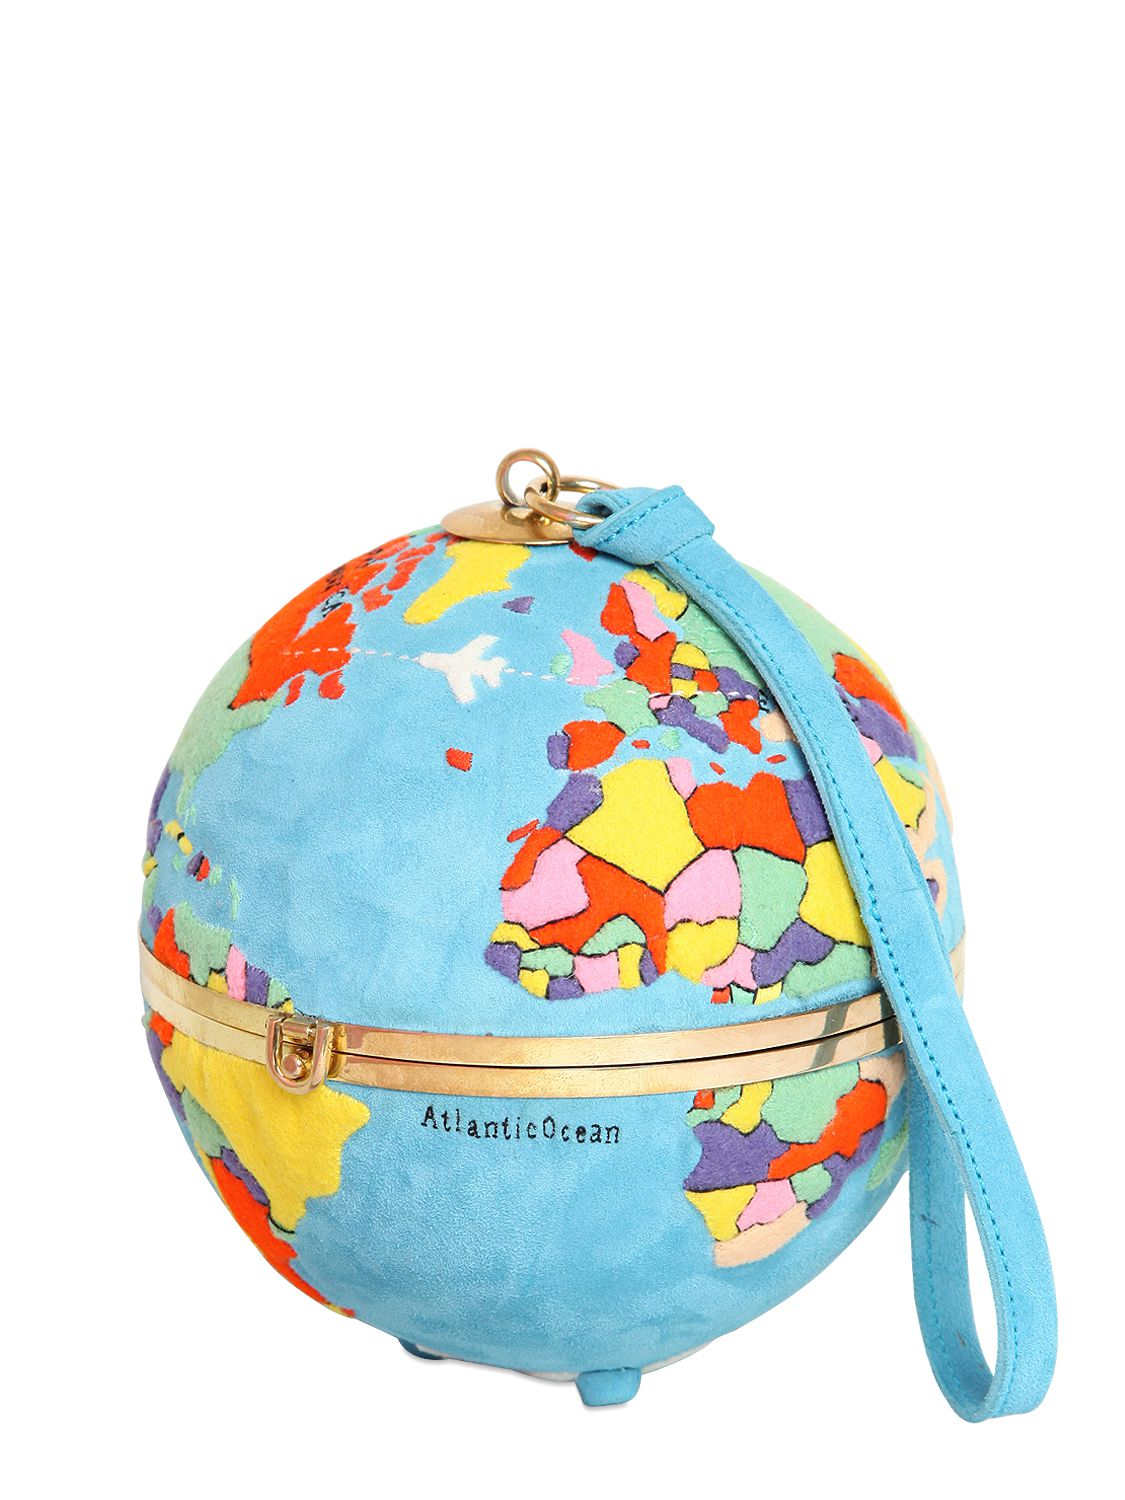 Olympia Le-Tan Globe Hand Embroidered Suede Clutch in Blue | Lyst